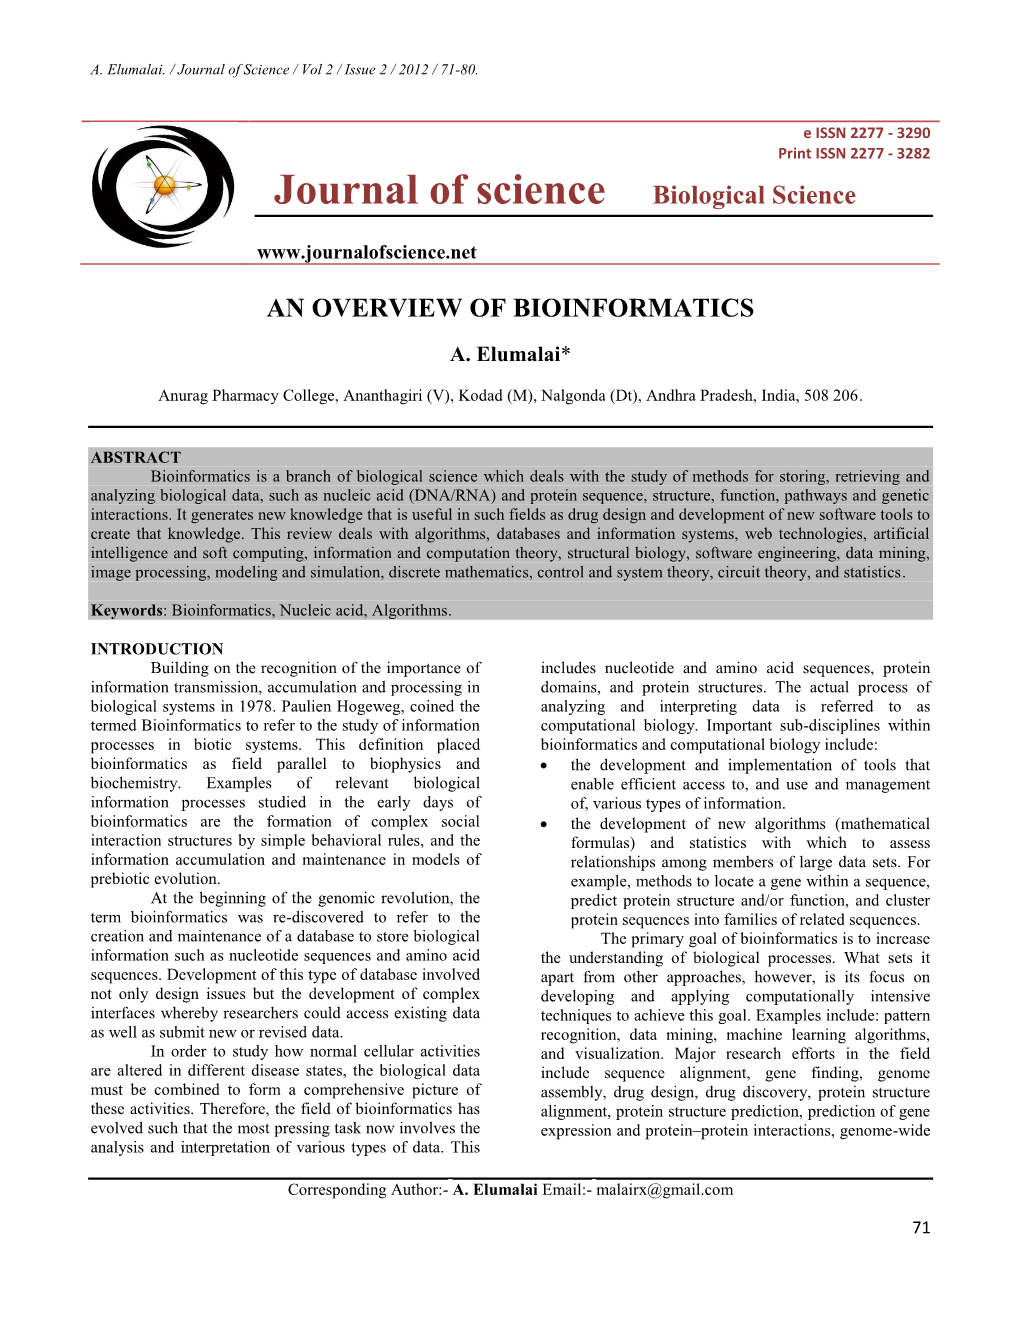 Journal of Science Biological Science